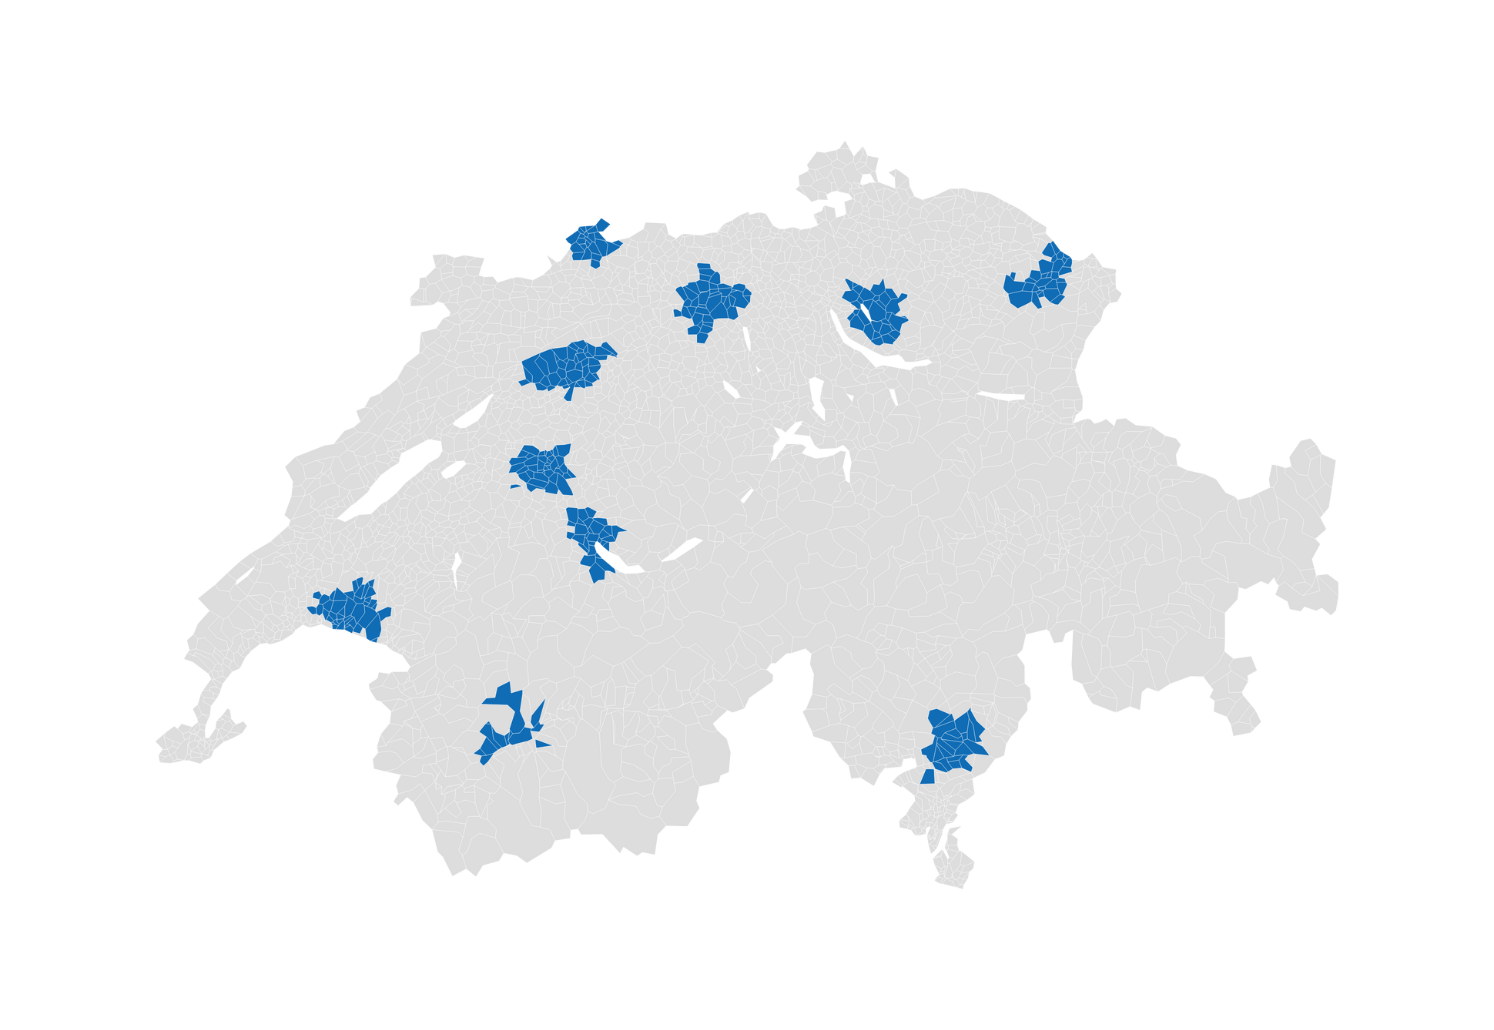 Selecting distribution areas in the vicinity of various subsidiaries in regional centres across Switzerland.